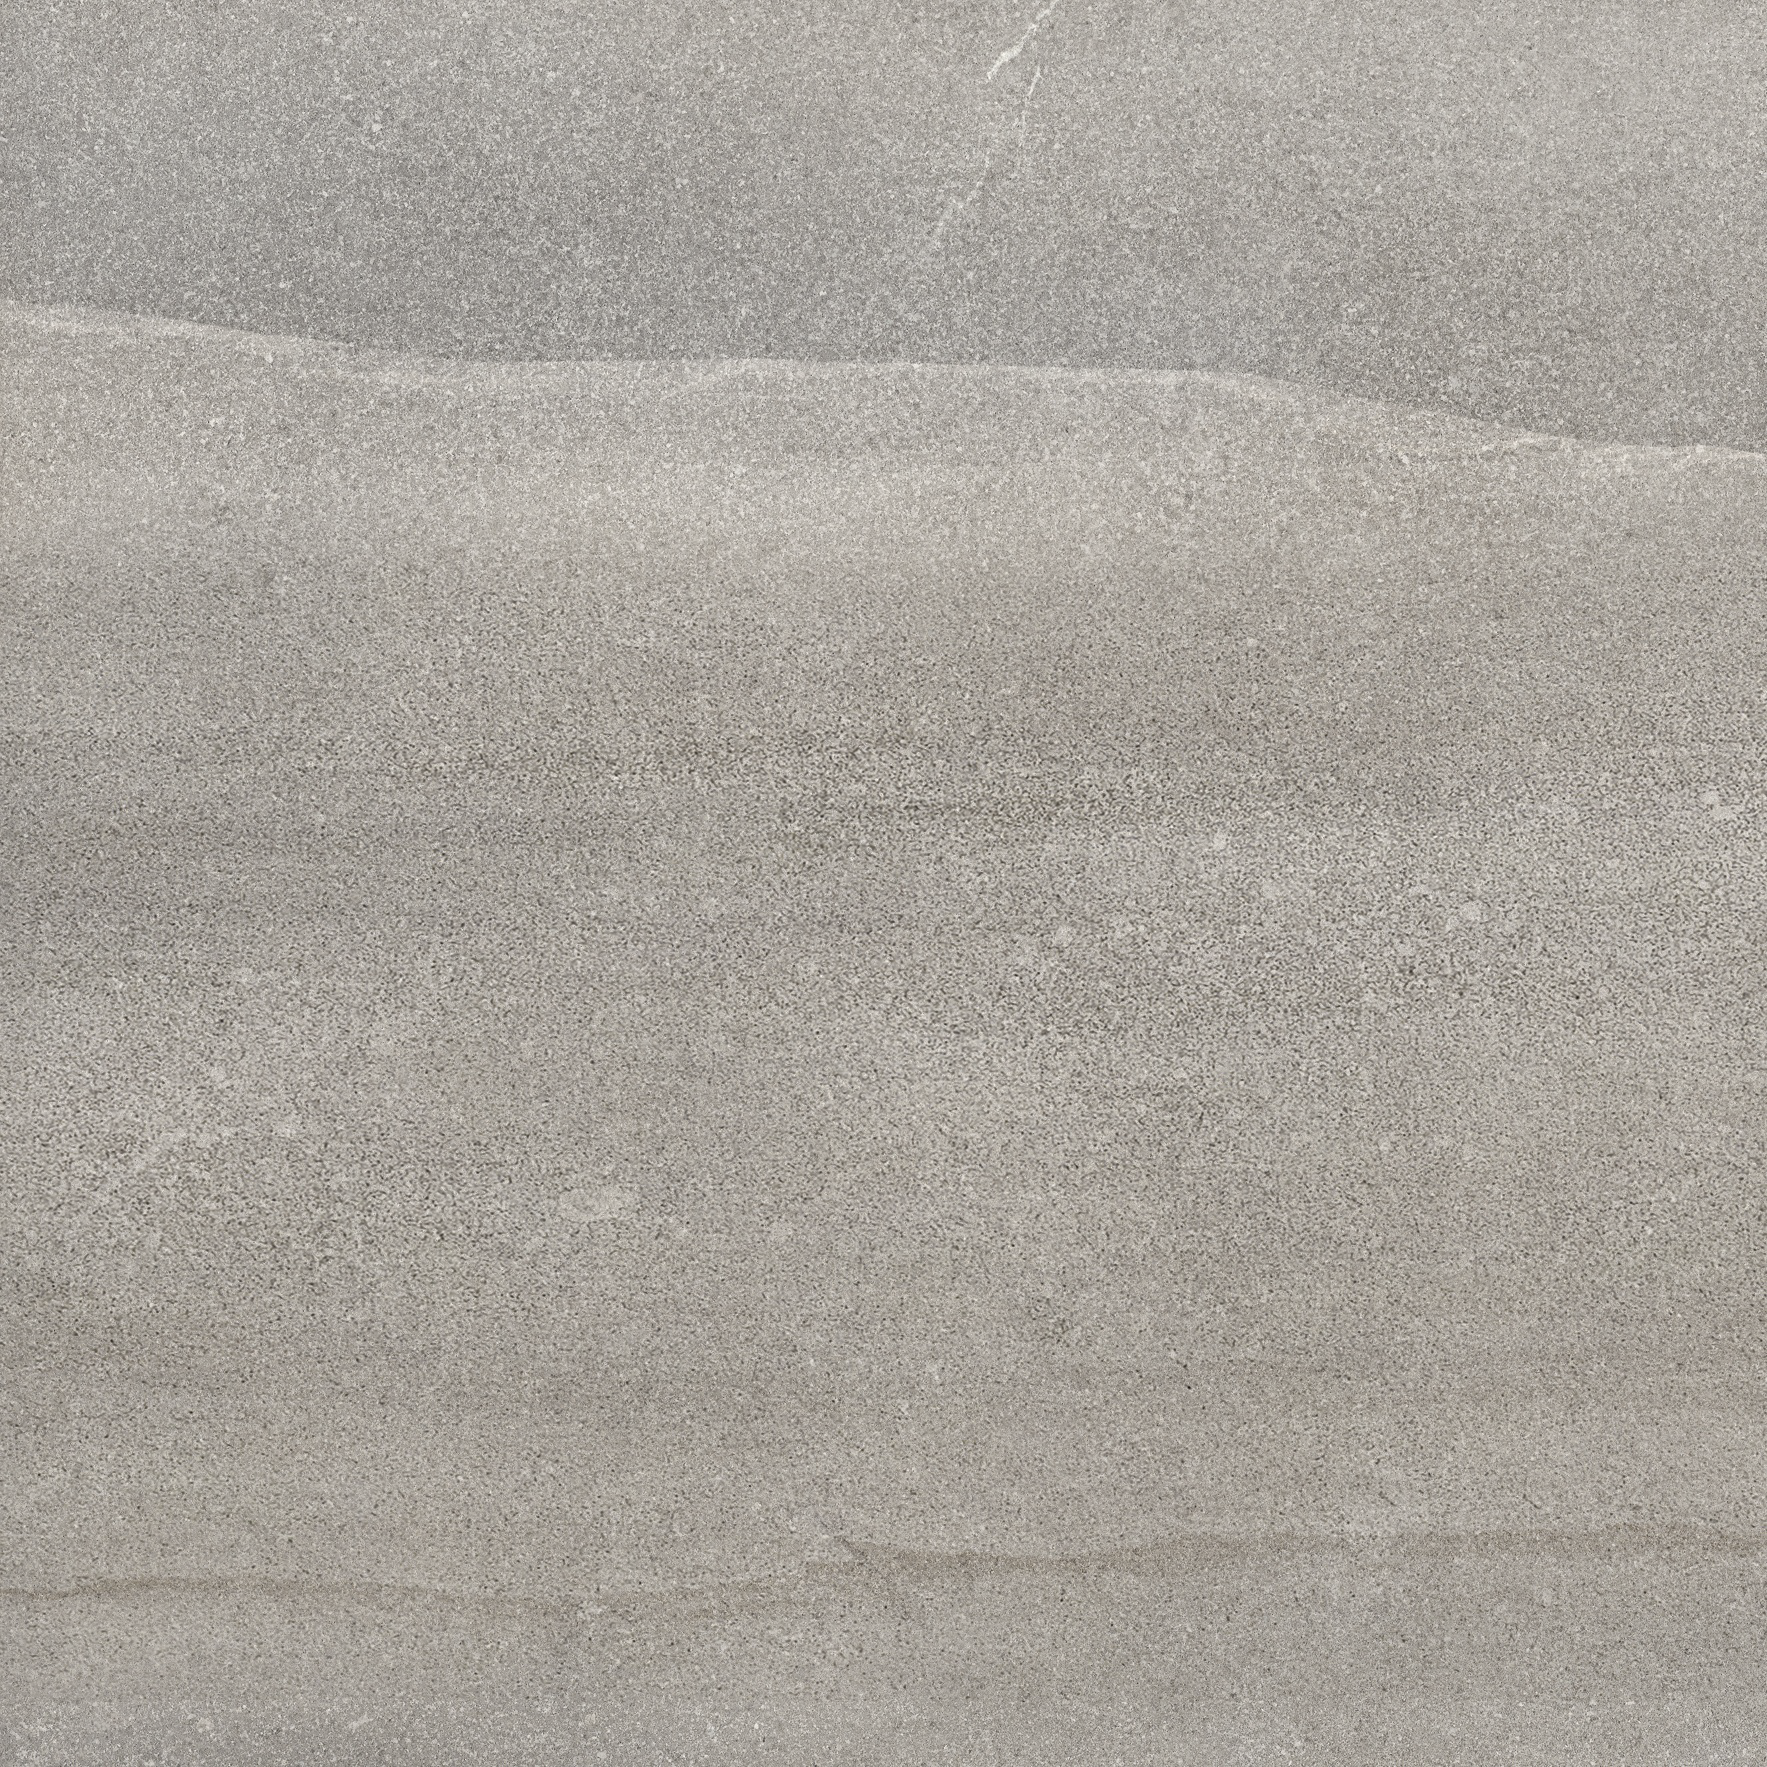 ash pattern glazed porcelain field tile from crux anatolia collection distributed by surface group international matte finish pressed edge 13x13 square shape